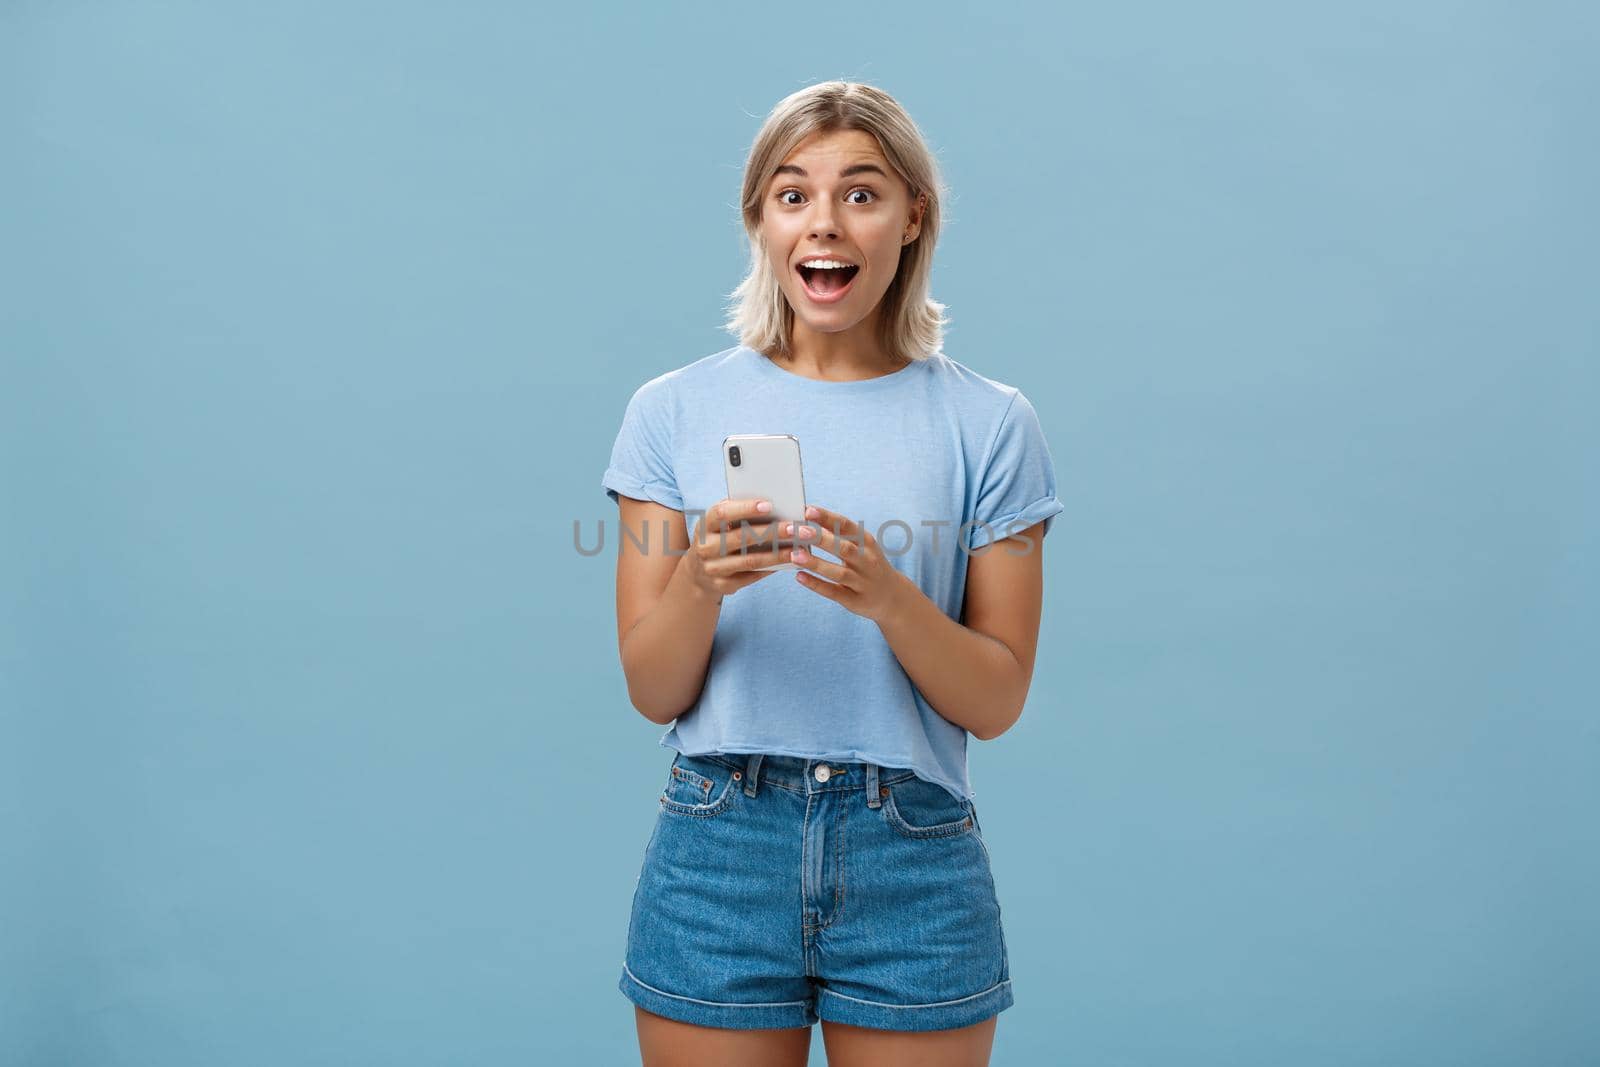 So happy receive premium for free reacting with enthusiasm and excitement on amazing message smiling broadly with delight and surprise holding smartphone posing over blue background. Copy space